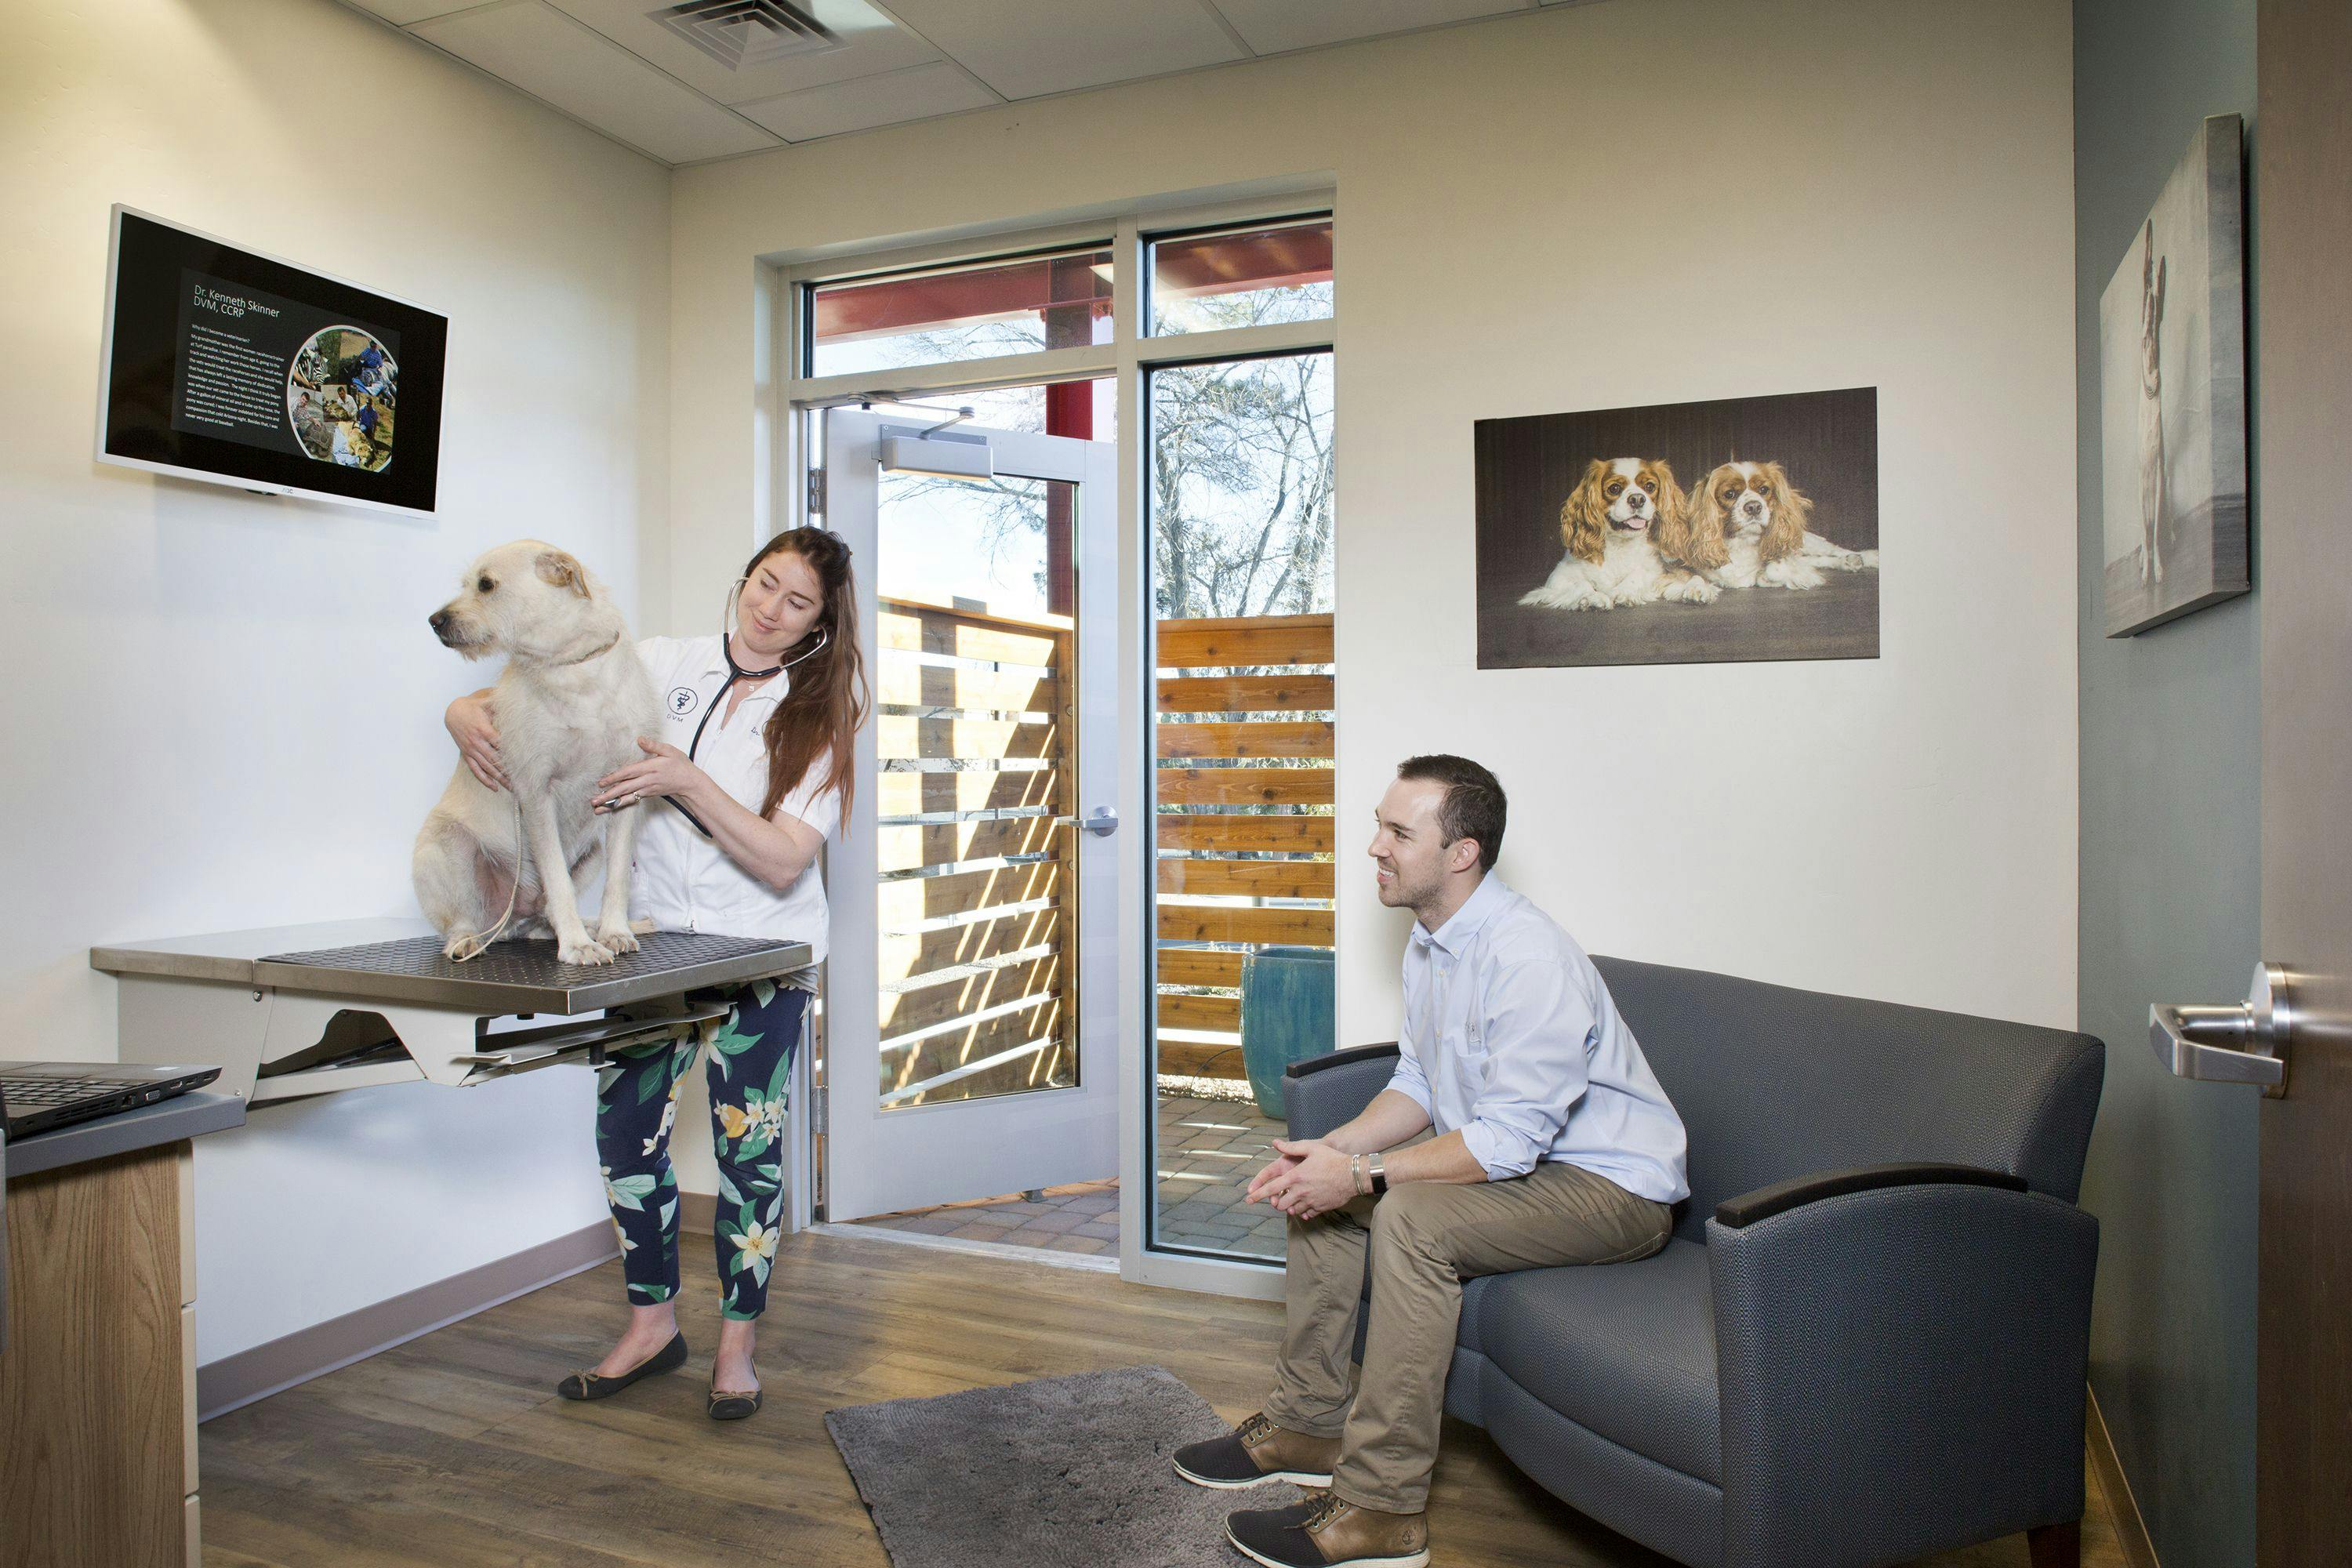 Consultation room at Prescott Animal Hospital. (Courtesy of Tim Muphy/Foto Imagery)